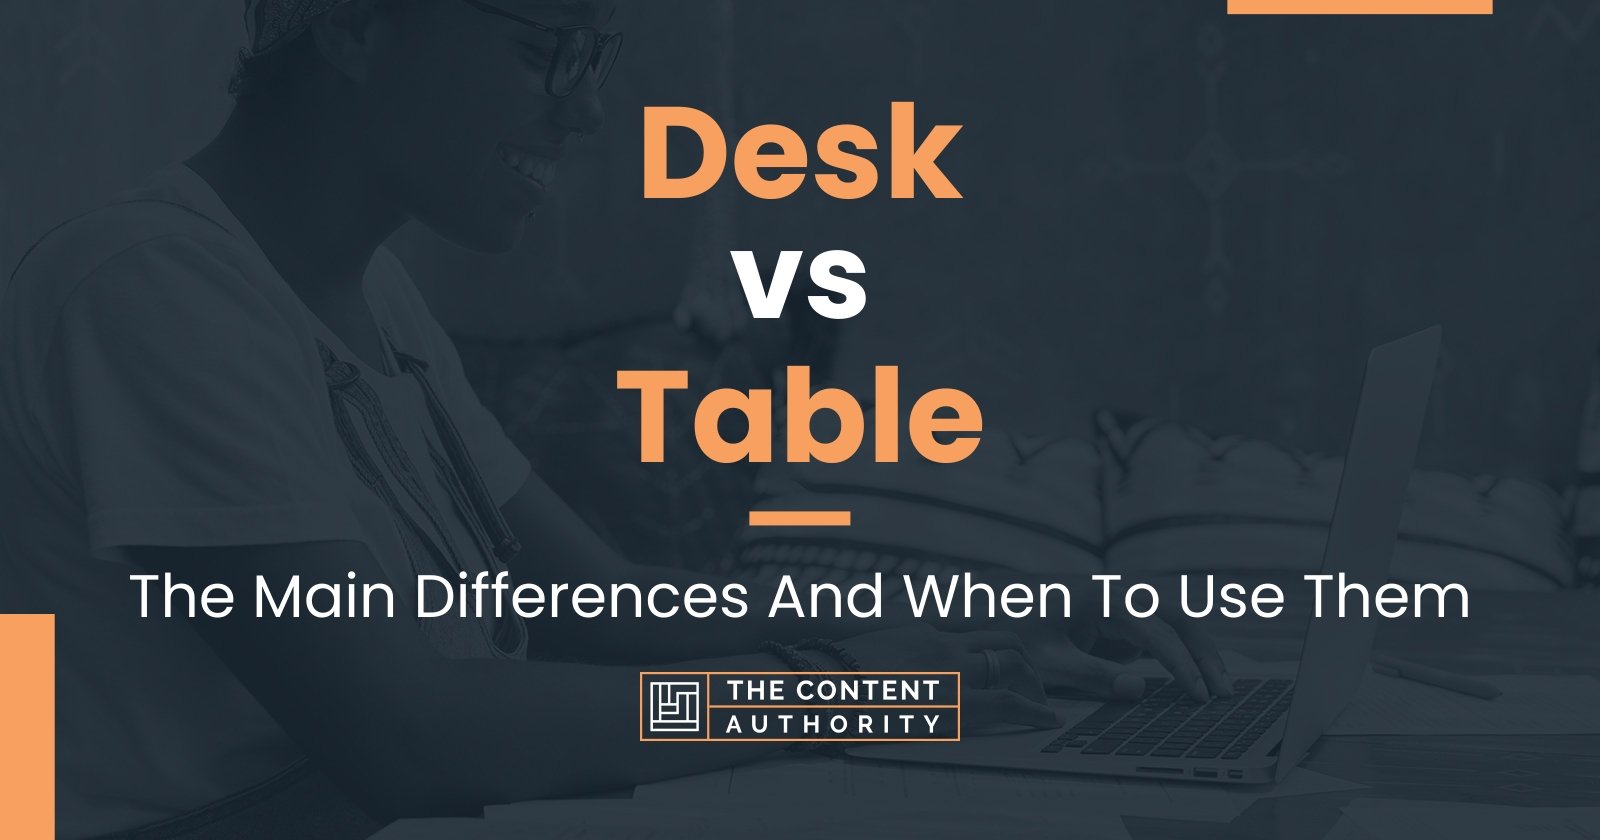 Desk vs Table: The Main Differences And When To Use Them